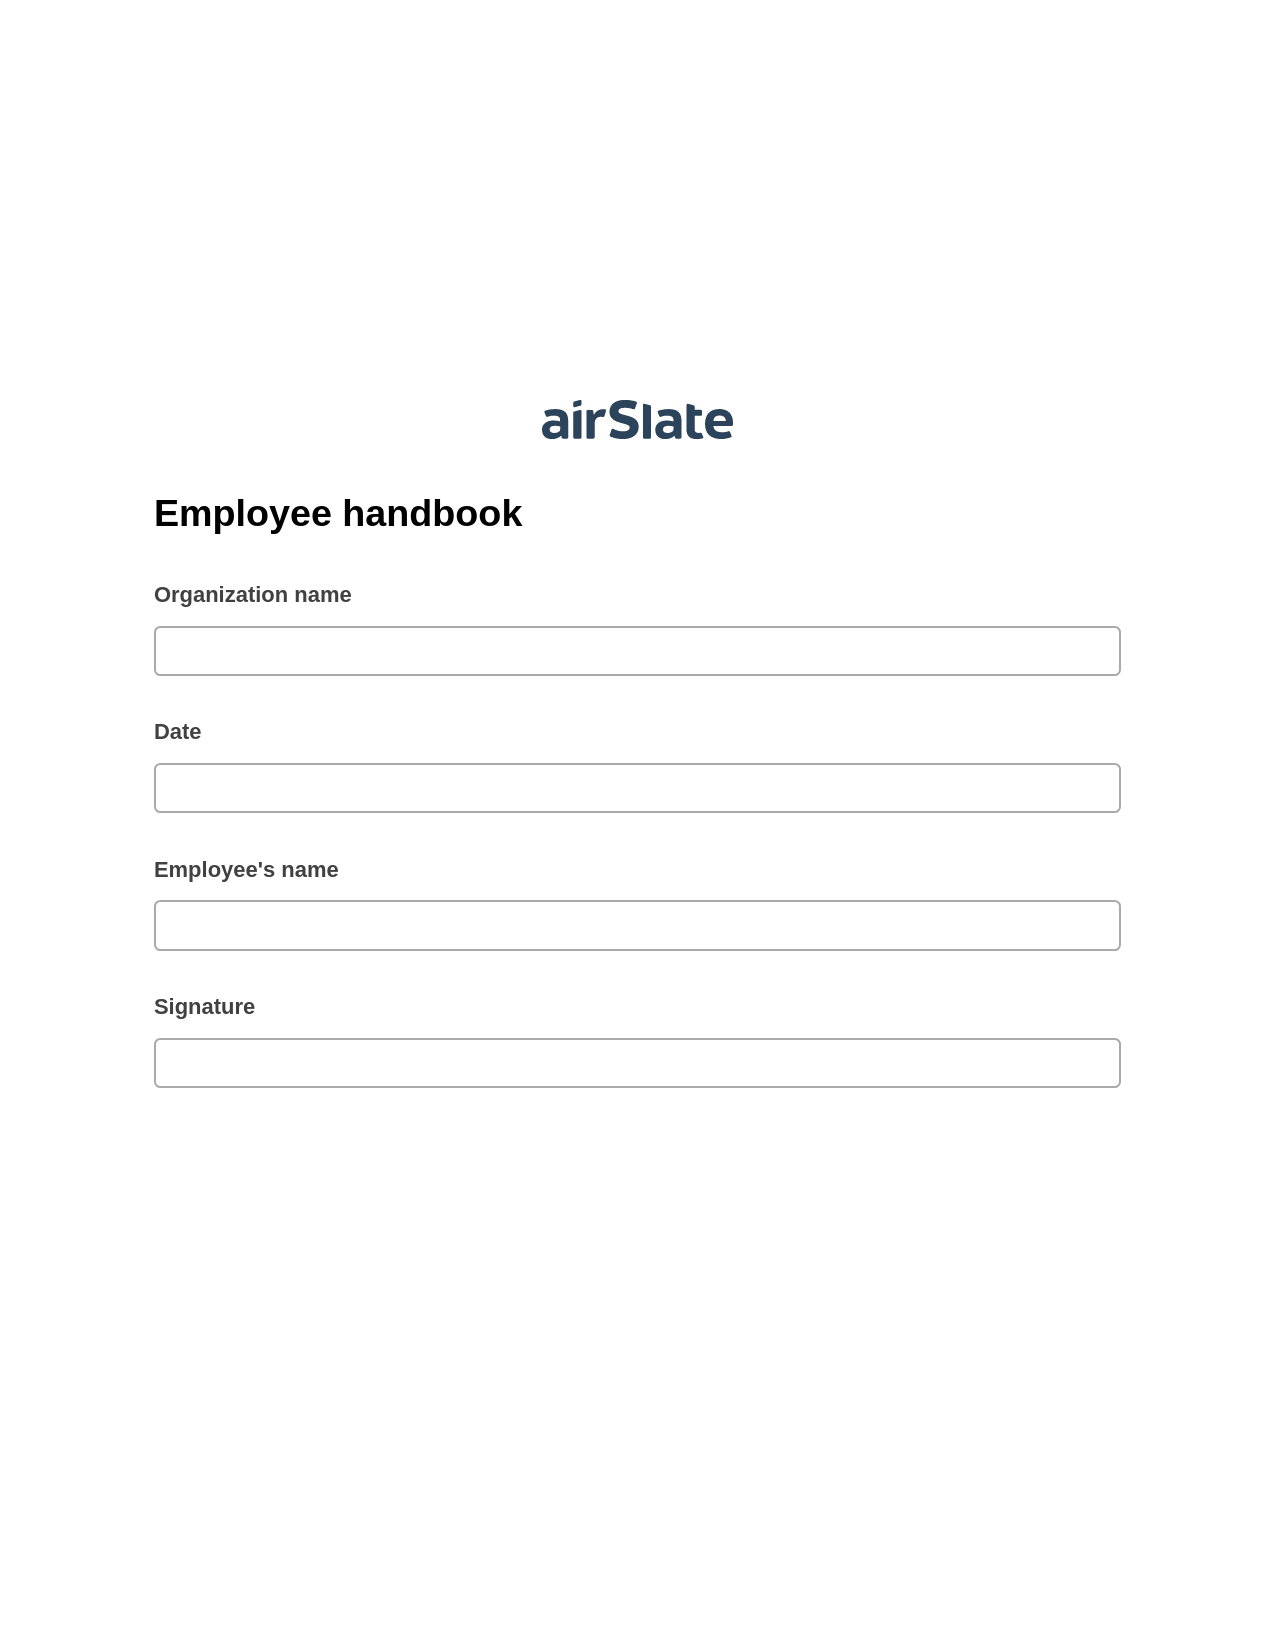 Employee handbook Pre-fill Slate from MS Dynamics 365 Records Bot, Roles Reminder Bot, Box Bot